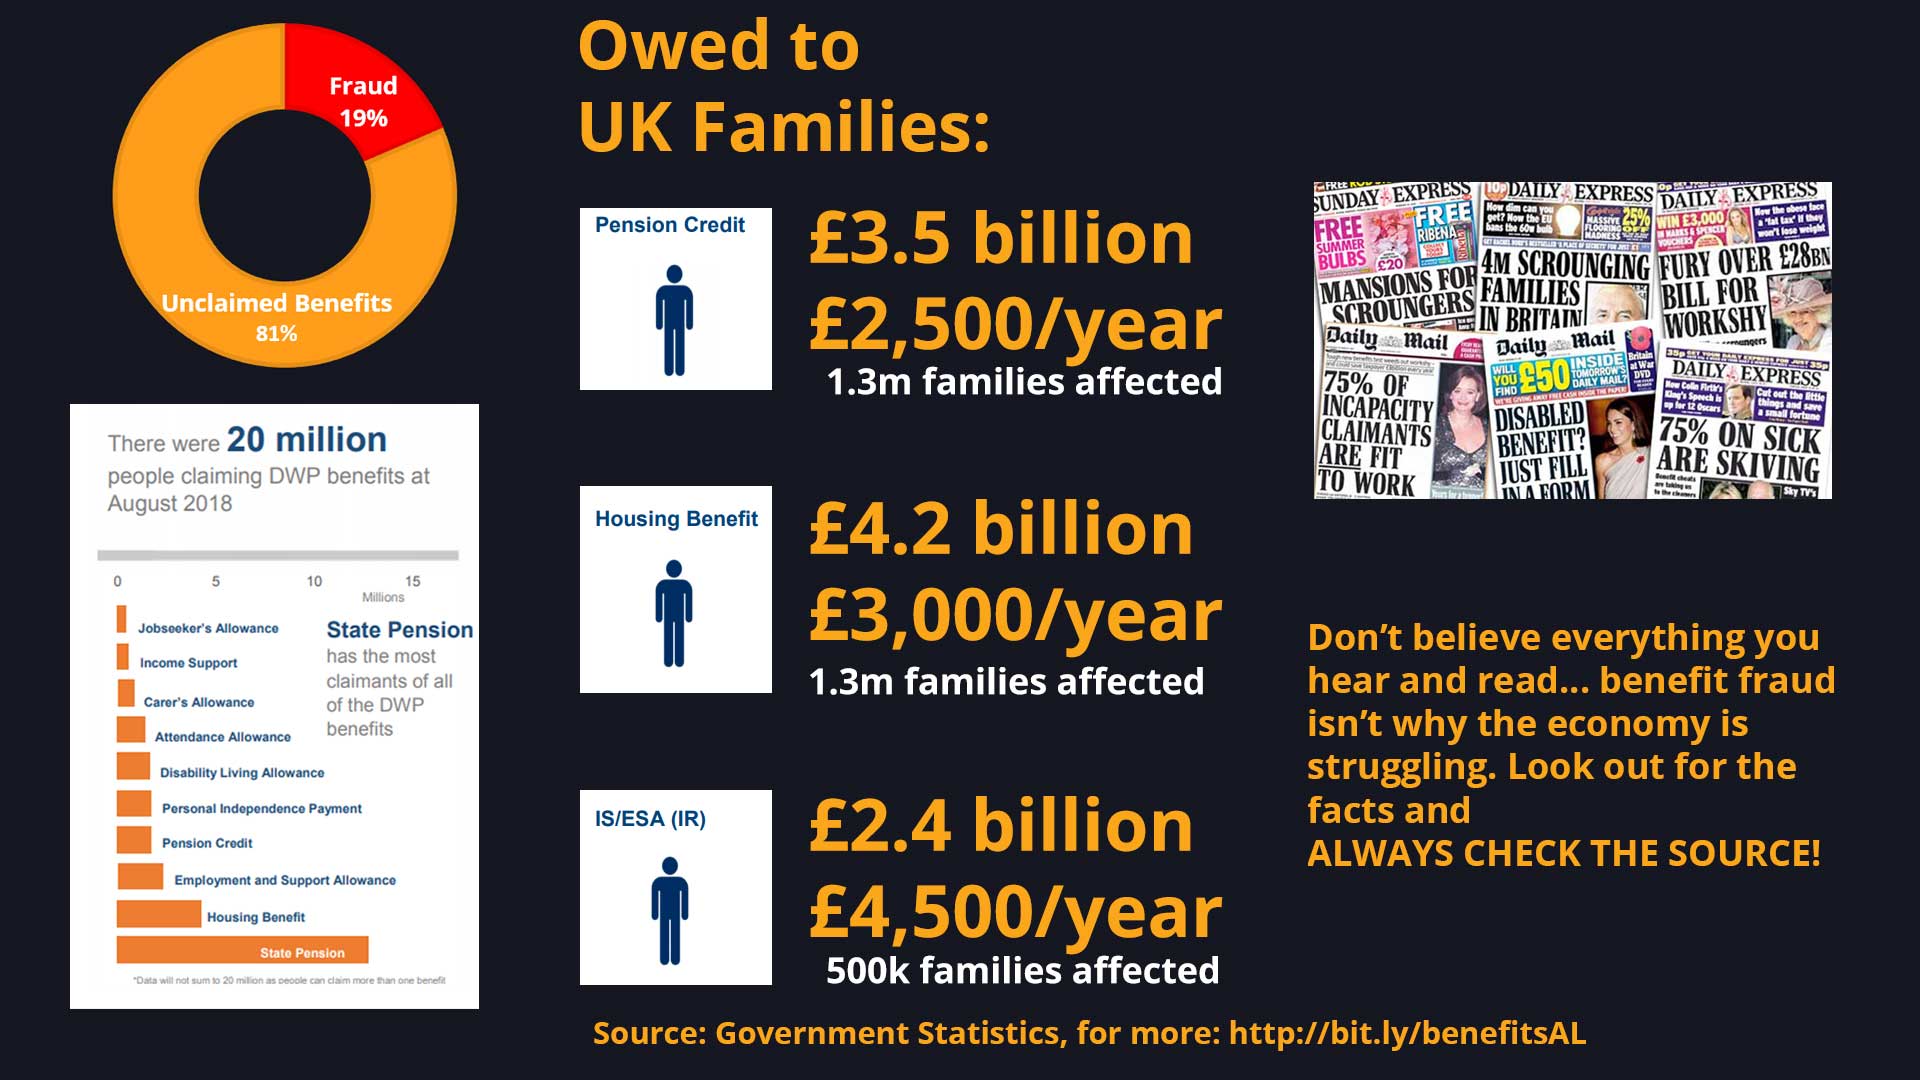 Benefit fraud is actually lower than unclaimed benefit entitlement - this infographic shows how much lower.